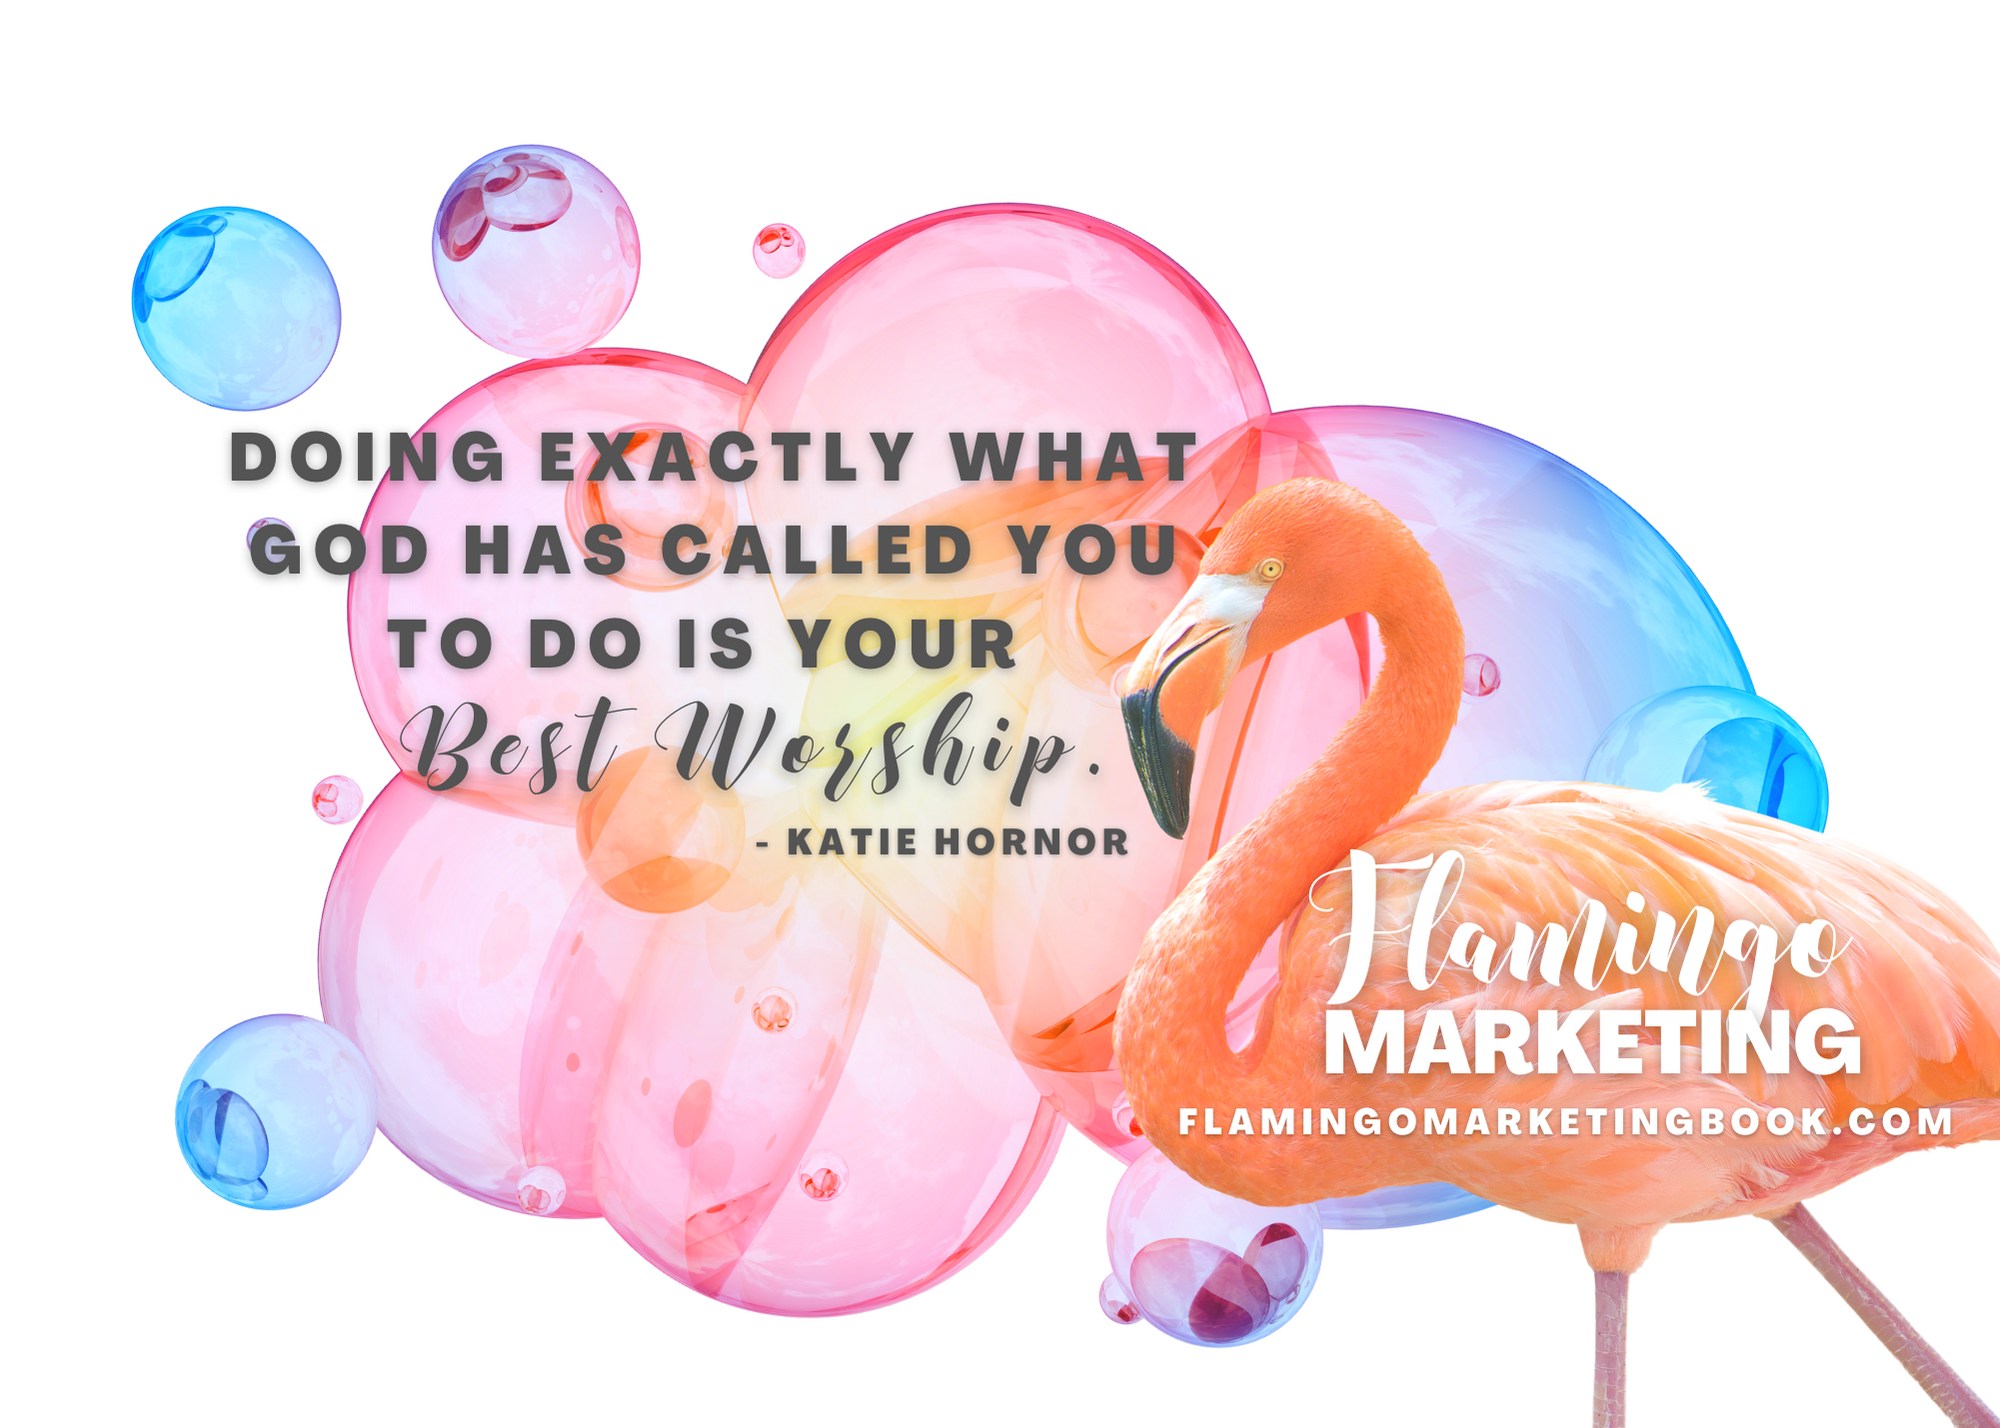 What is more important sales or customer service? sell an online program Katie Hornor Flamingo advantage